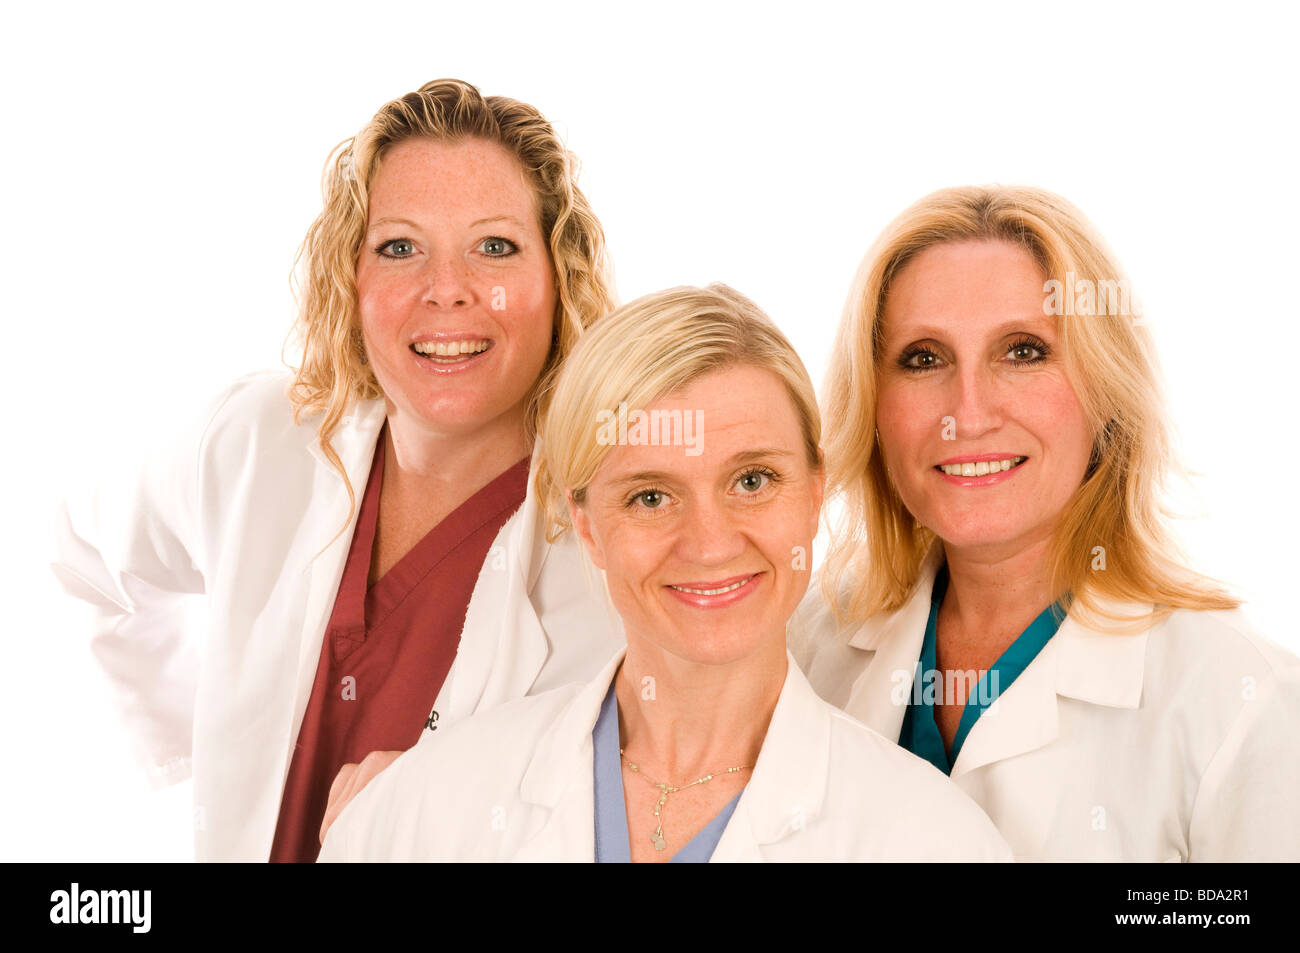 team of three happy and confident female doctors or nurses medical personnel wearing colorful scrubs clothes and white lab coats Stock Photo